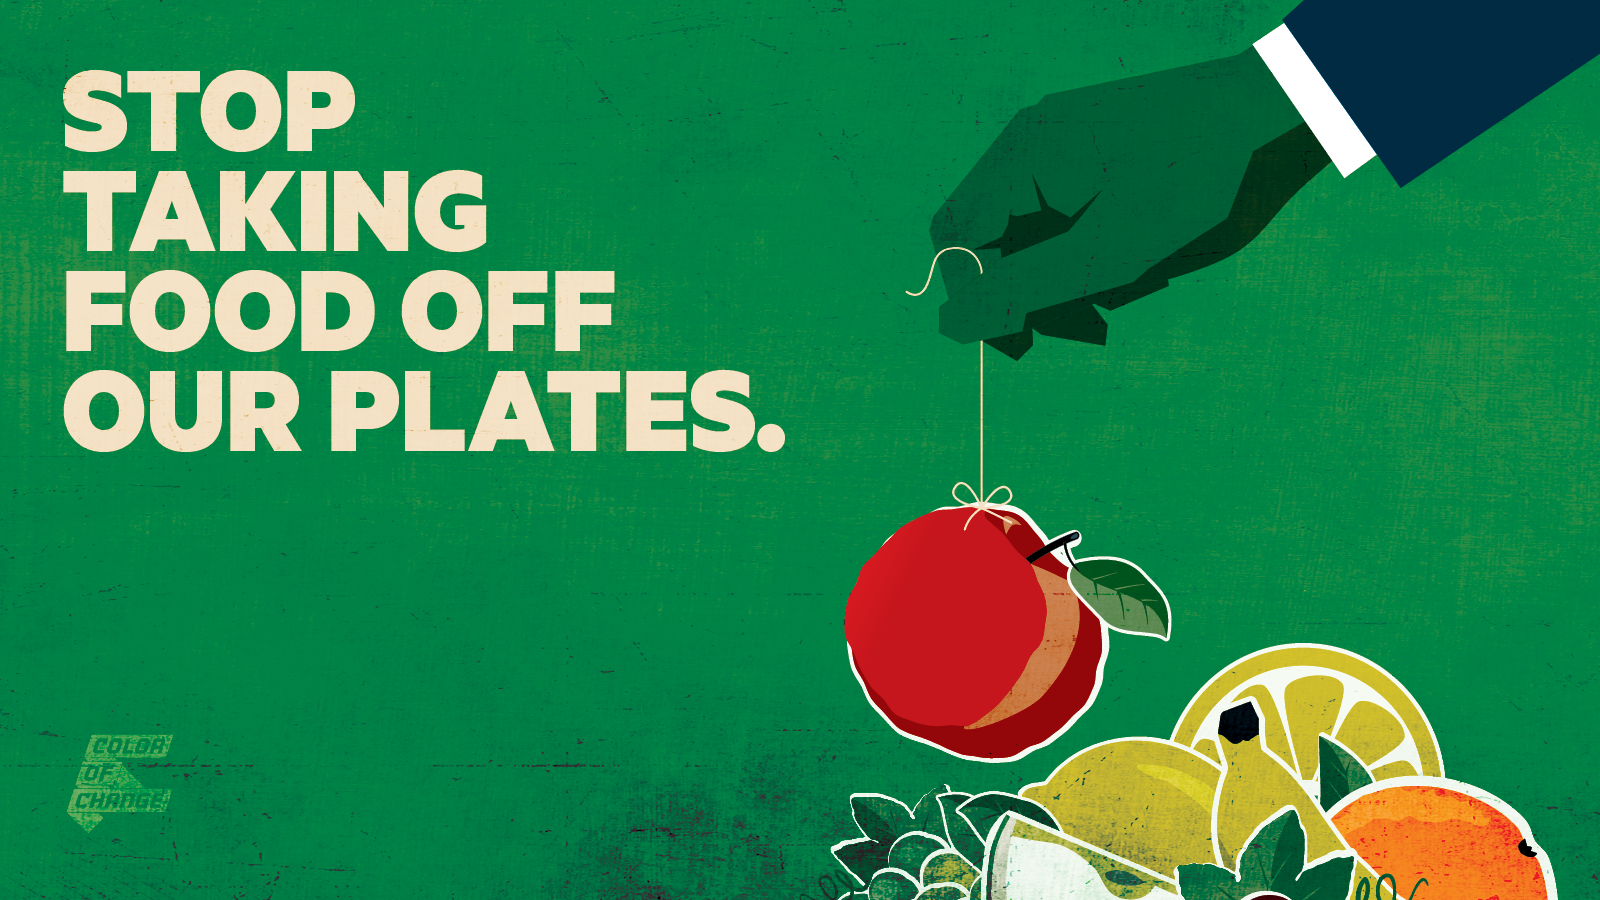 The text reads, "STOP TAKING FOOD OFF OUR PLATES." It is on a green background with a suited arm pulling an apple up with a string. The COC logo is in the bottom lefthand corner.